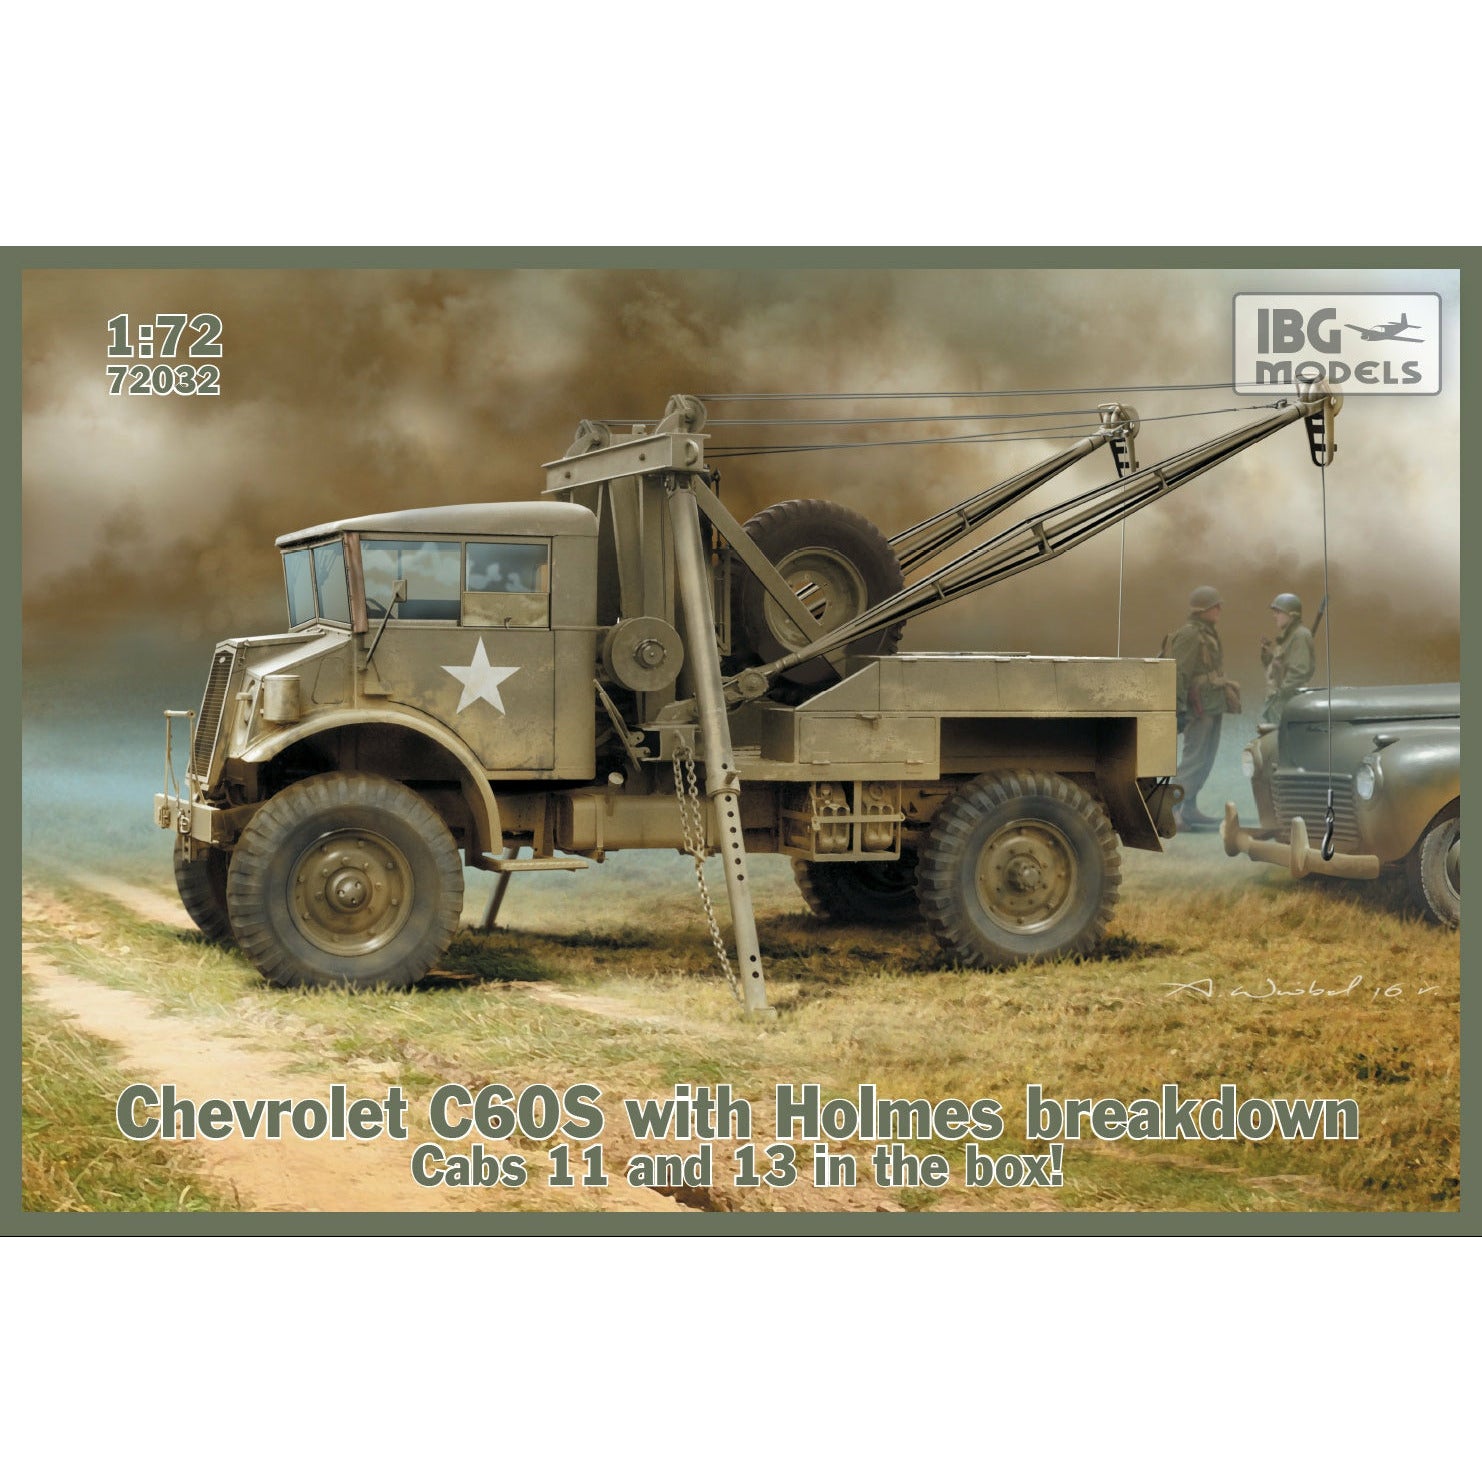 Chevrolet C60S with Holmes Breakdown 1/72 #72032 by IBG Models